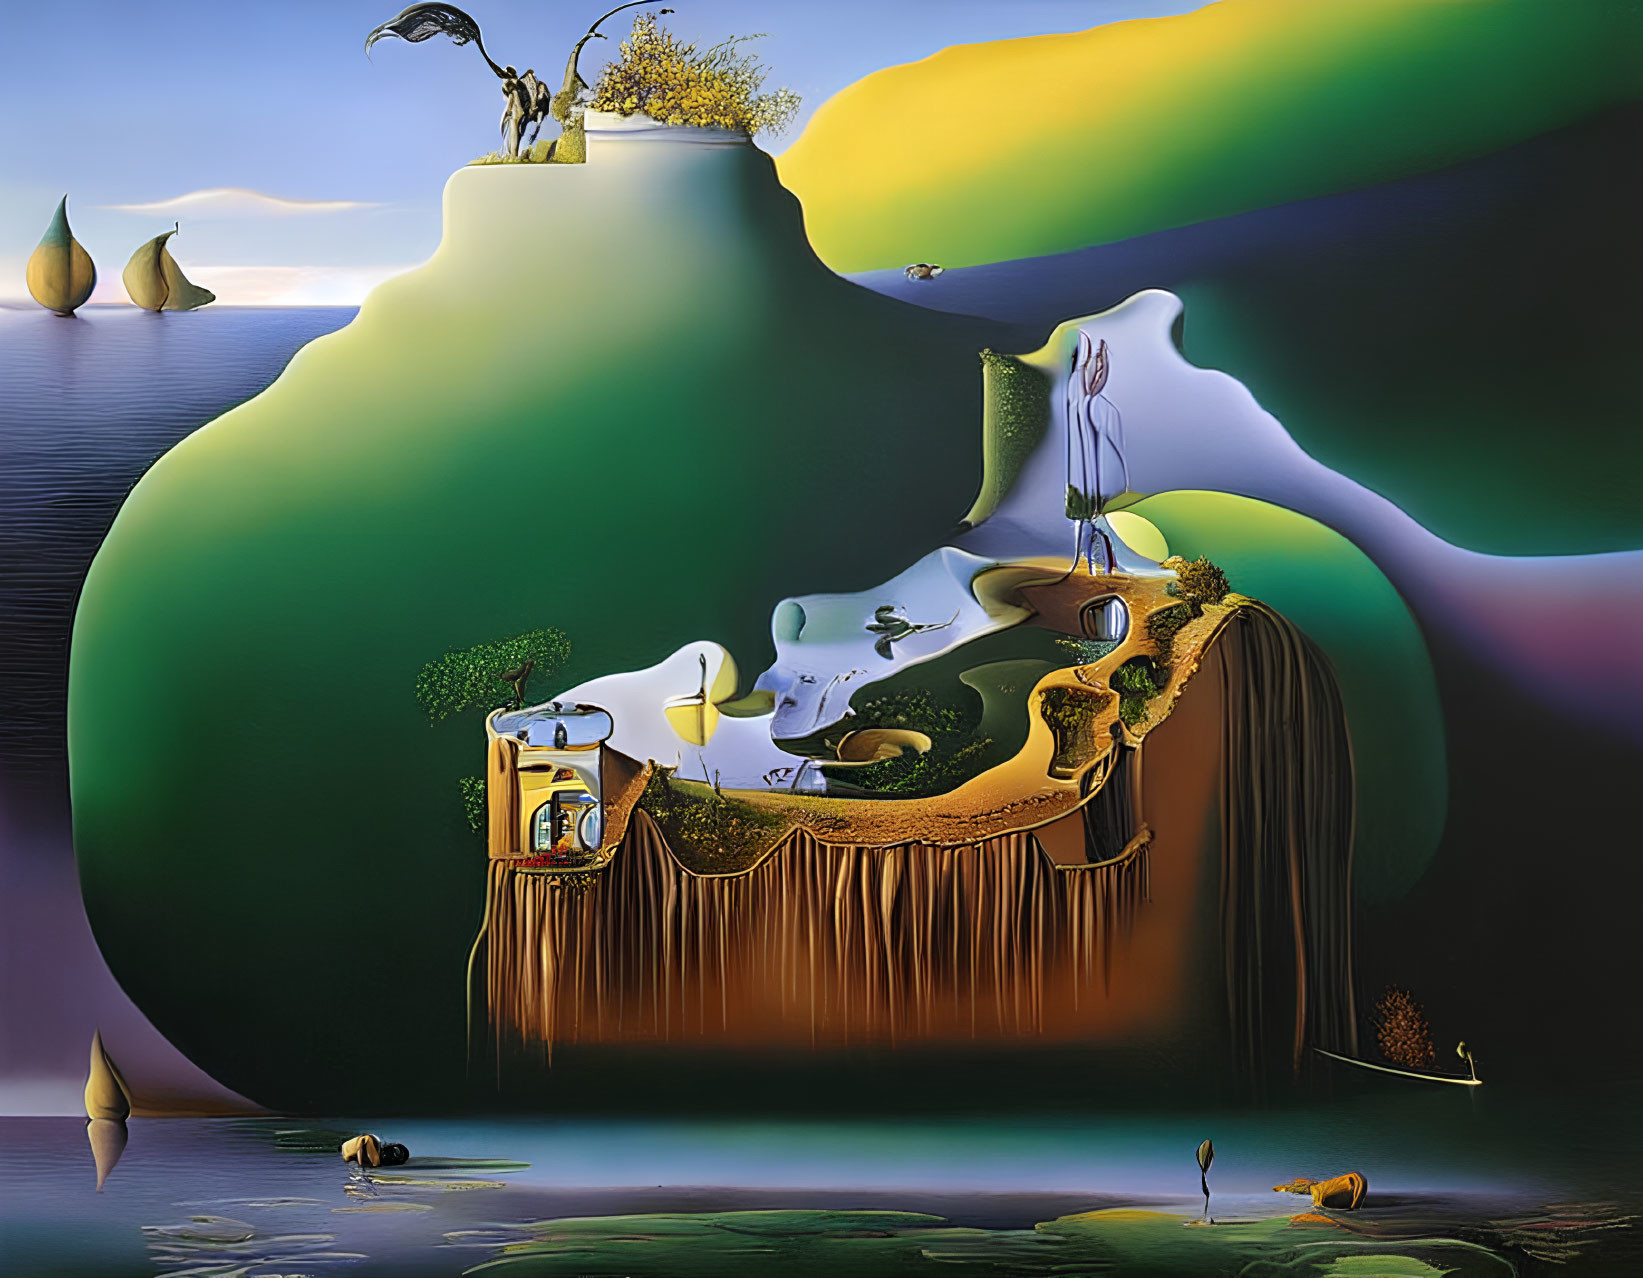 Surreal landscape with elephant-like trees and golden waterfall